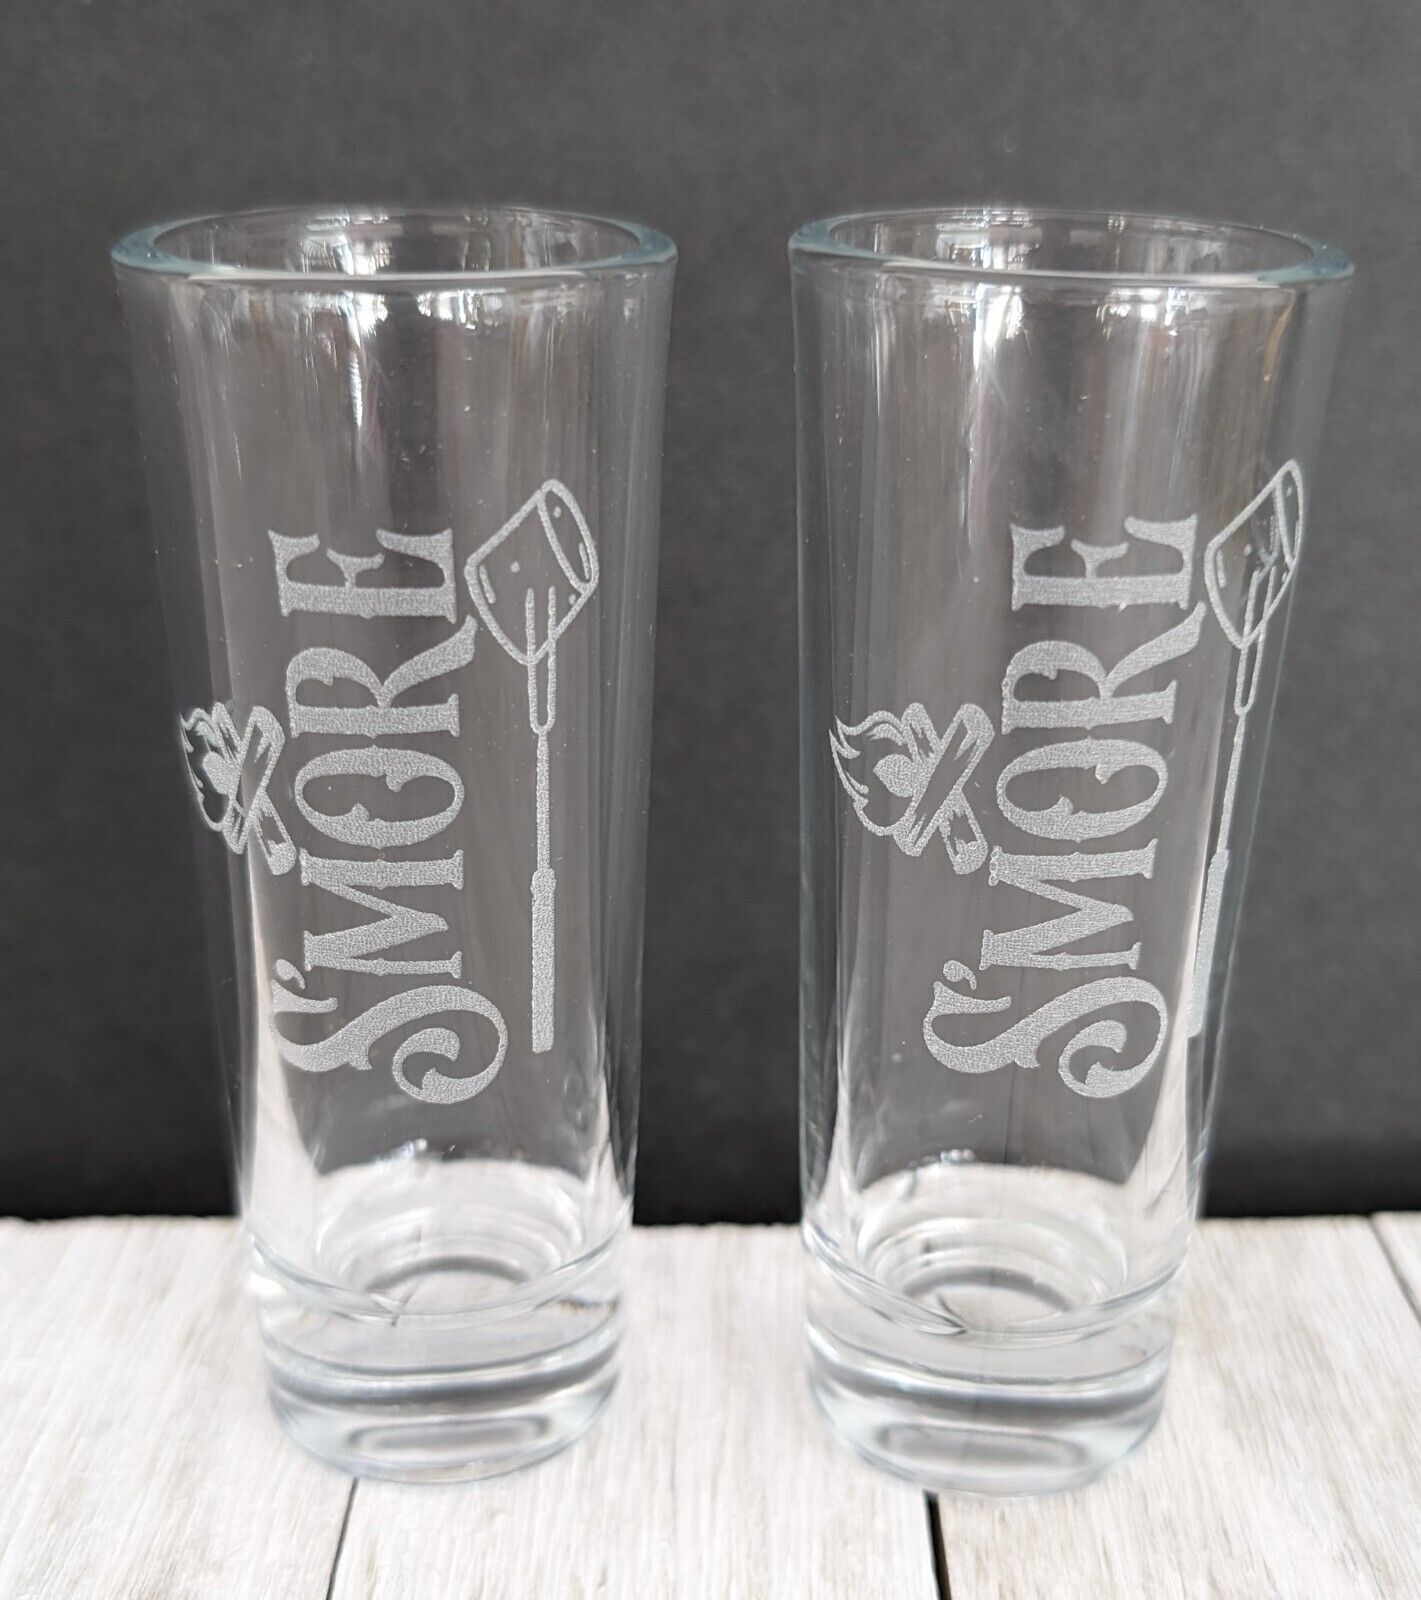 Pair of S'more Shot Glasses -  2oz - Handmade -  see matching S'morcuterie Tray